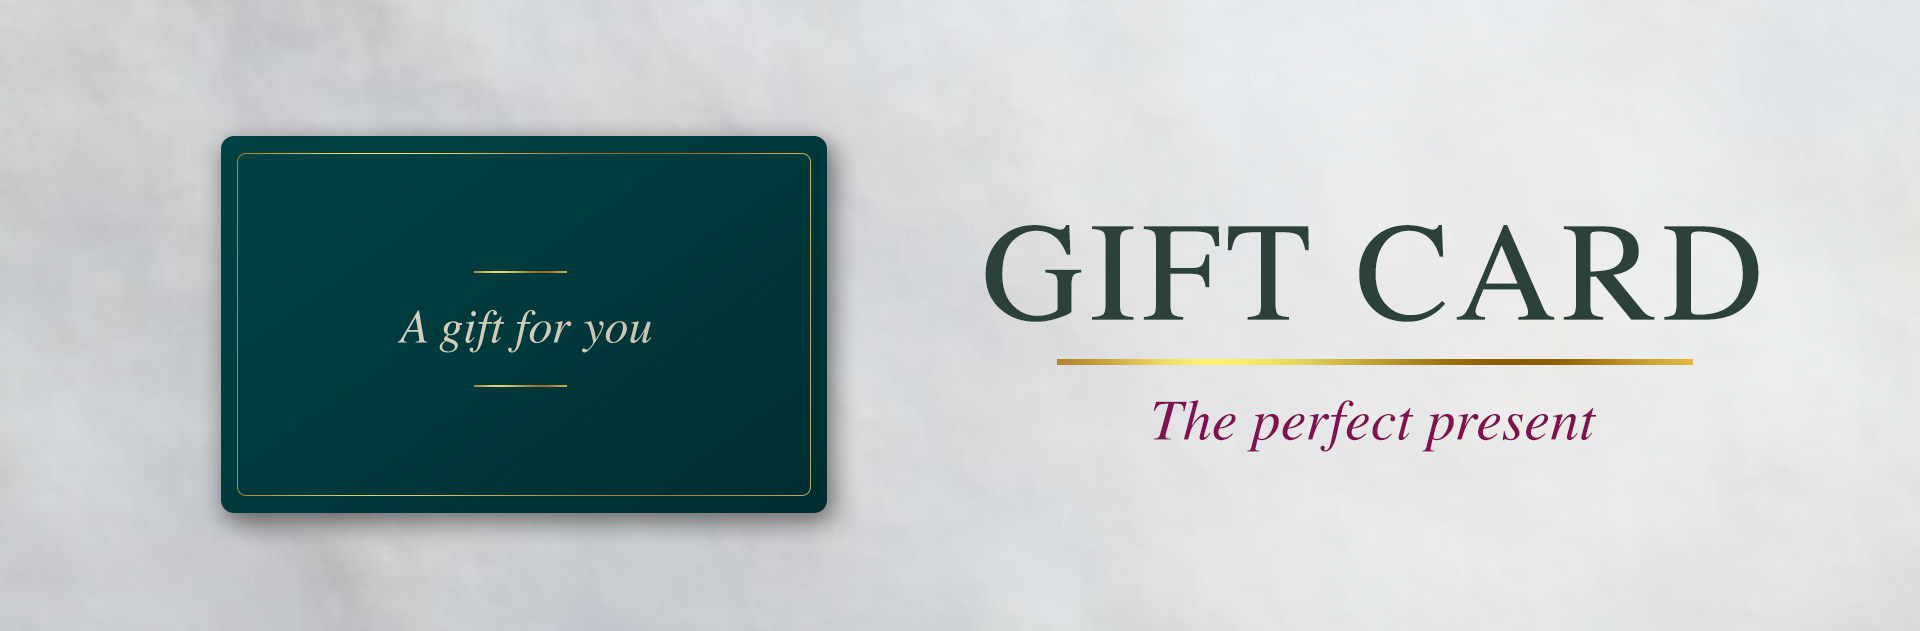 The Greave Dunning Gift Card